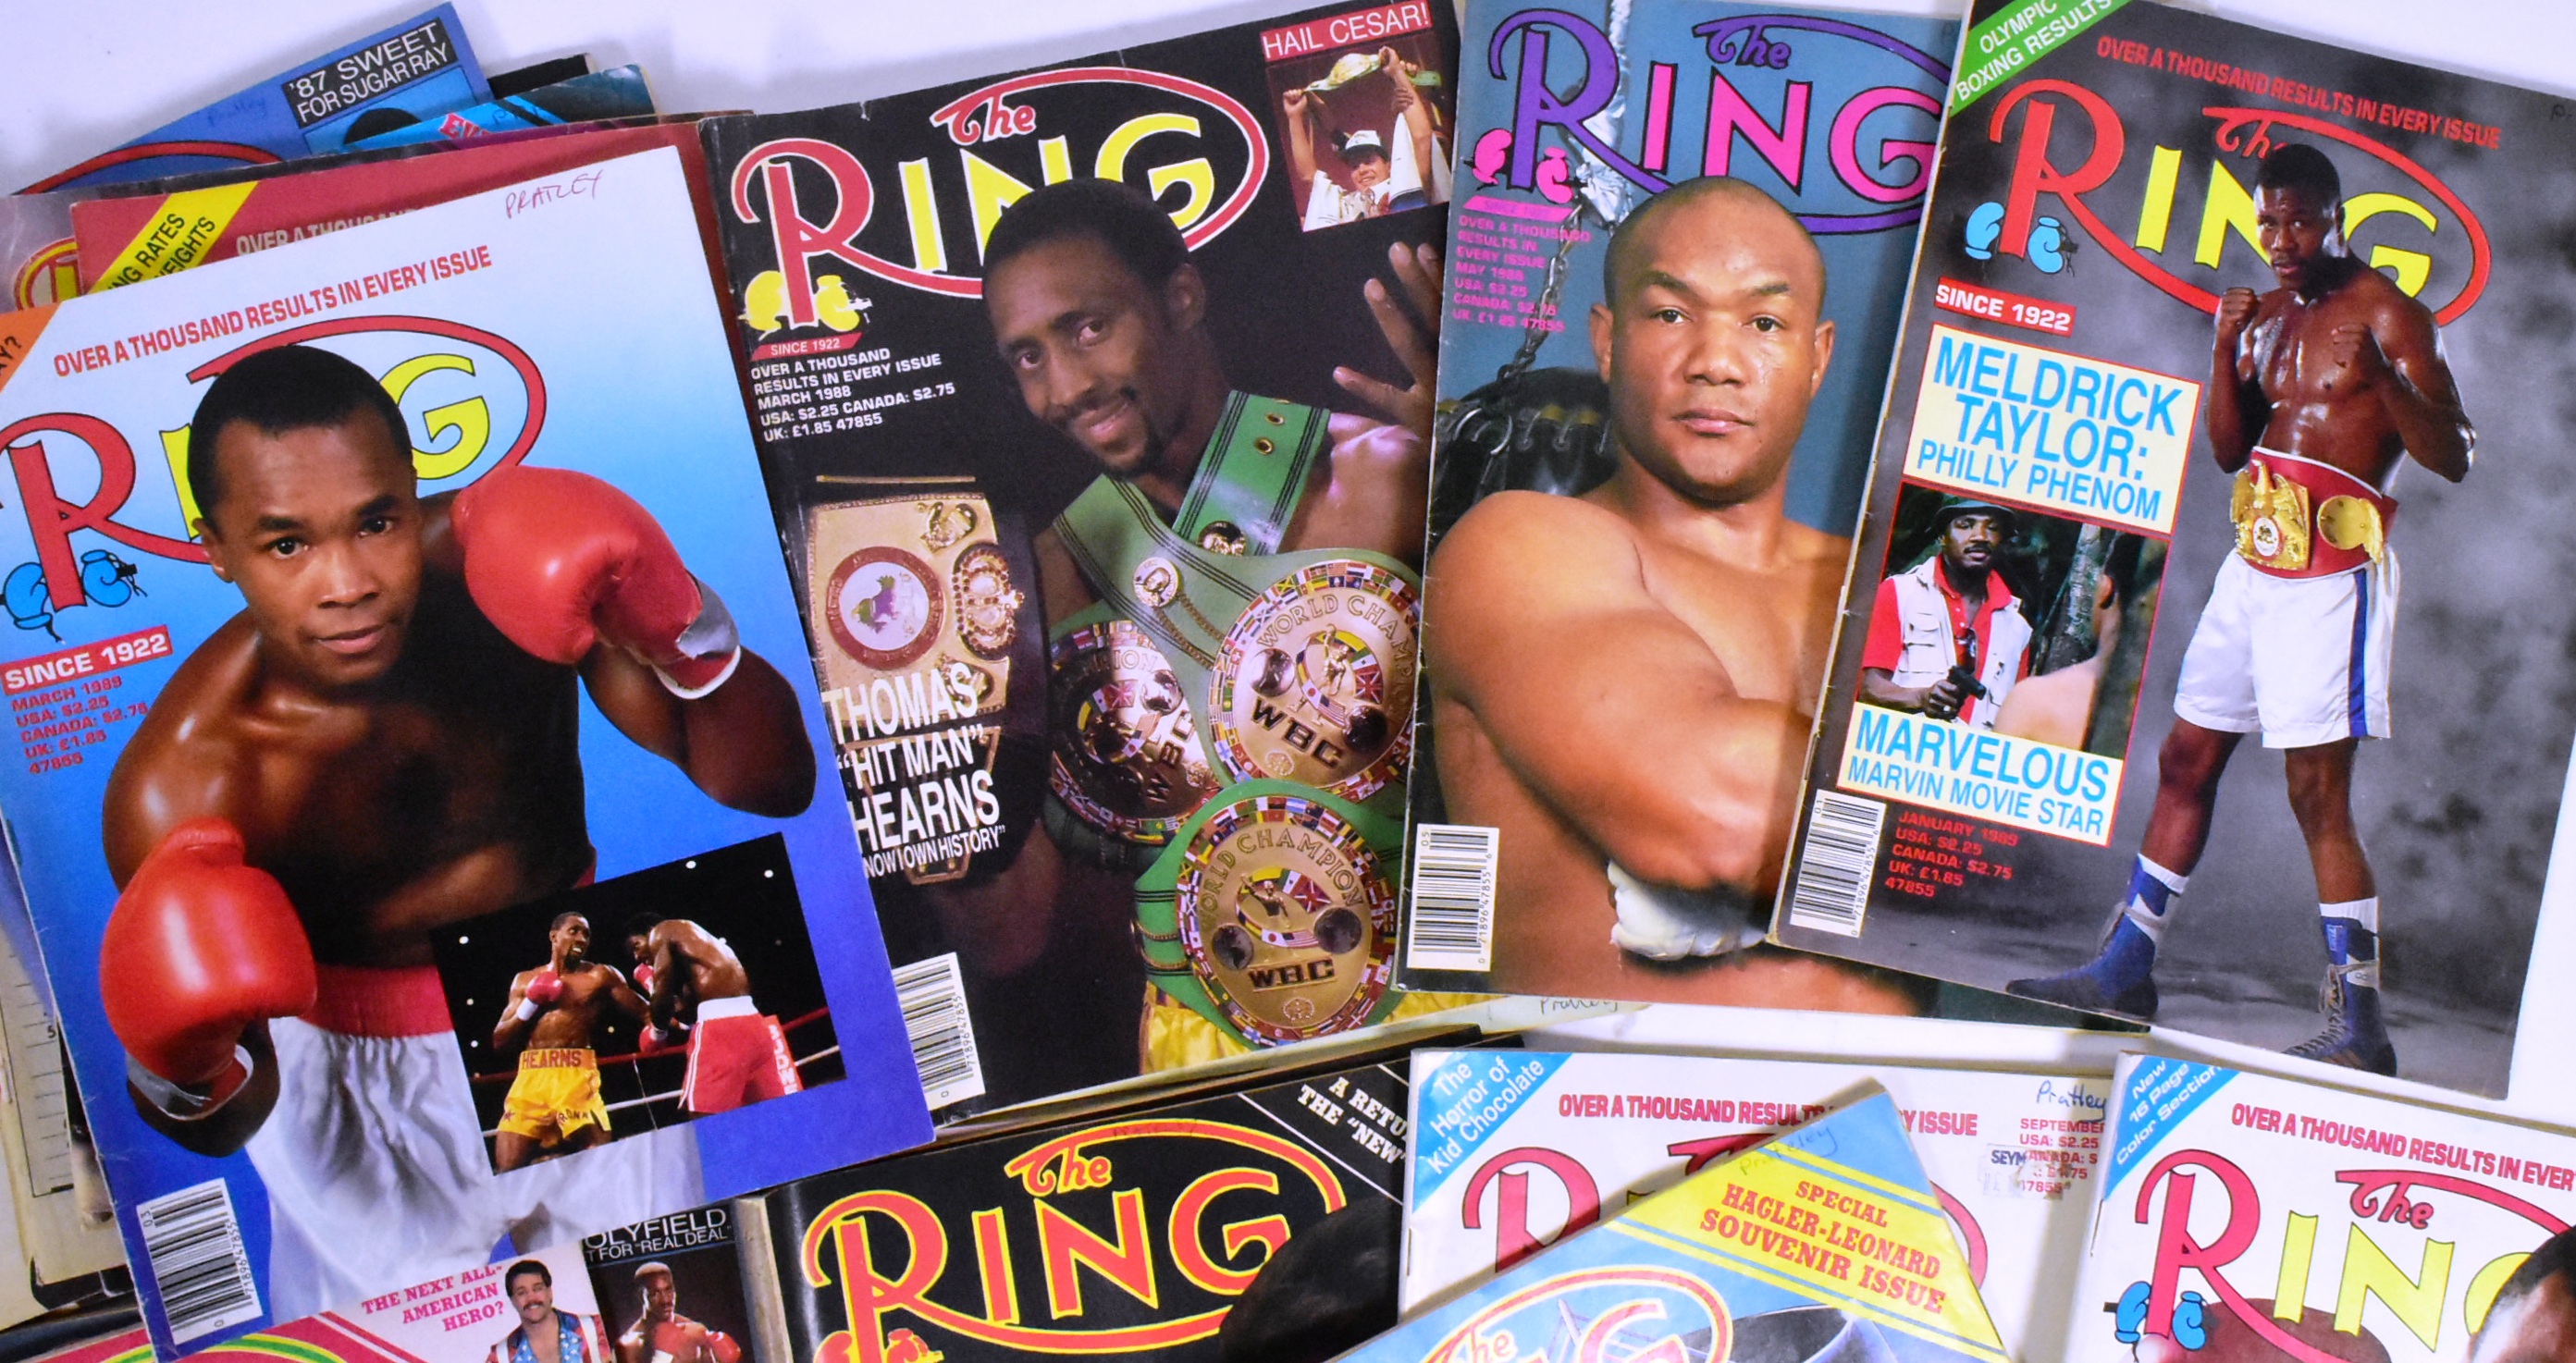 COLLECTION OF VINTAGE WRESTLING MAGAZINES - THE RING - Bild 5 aus 5